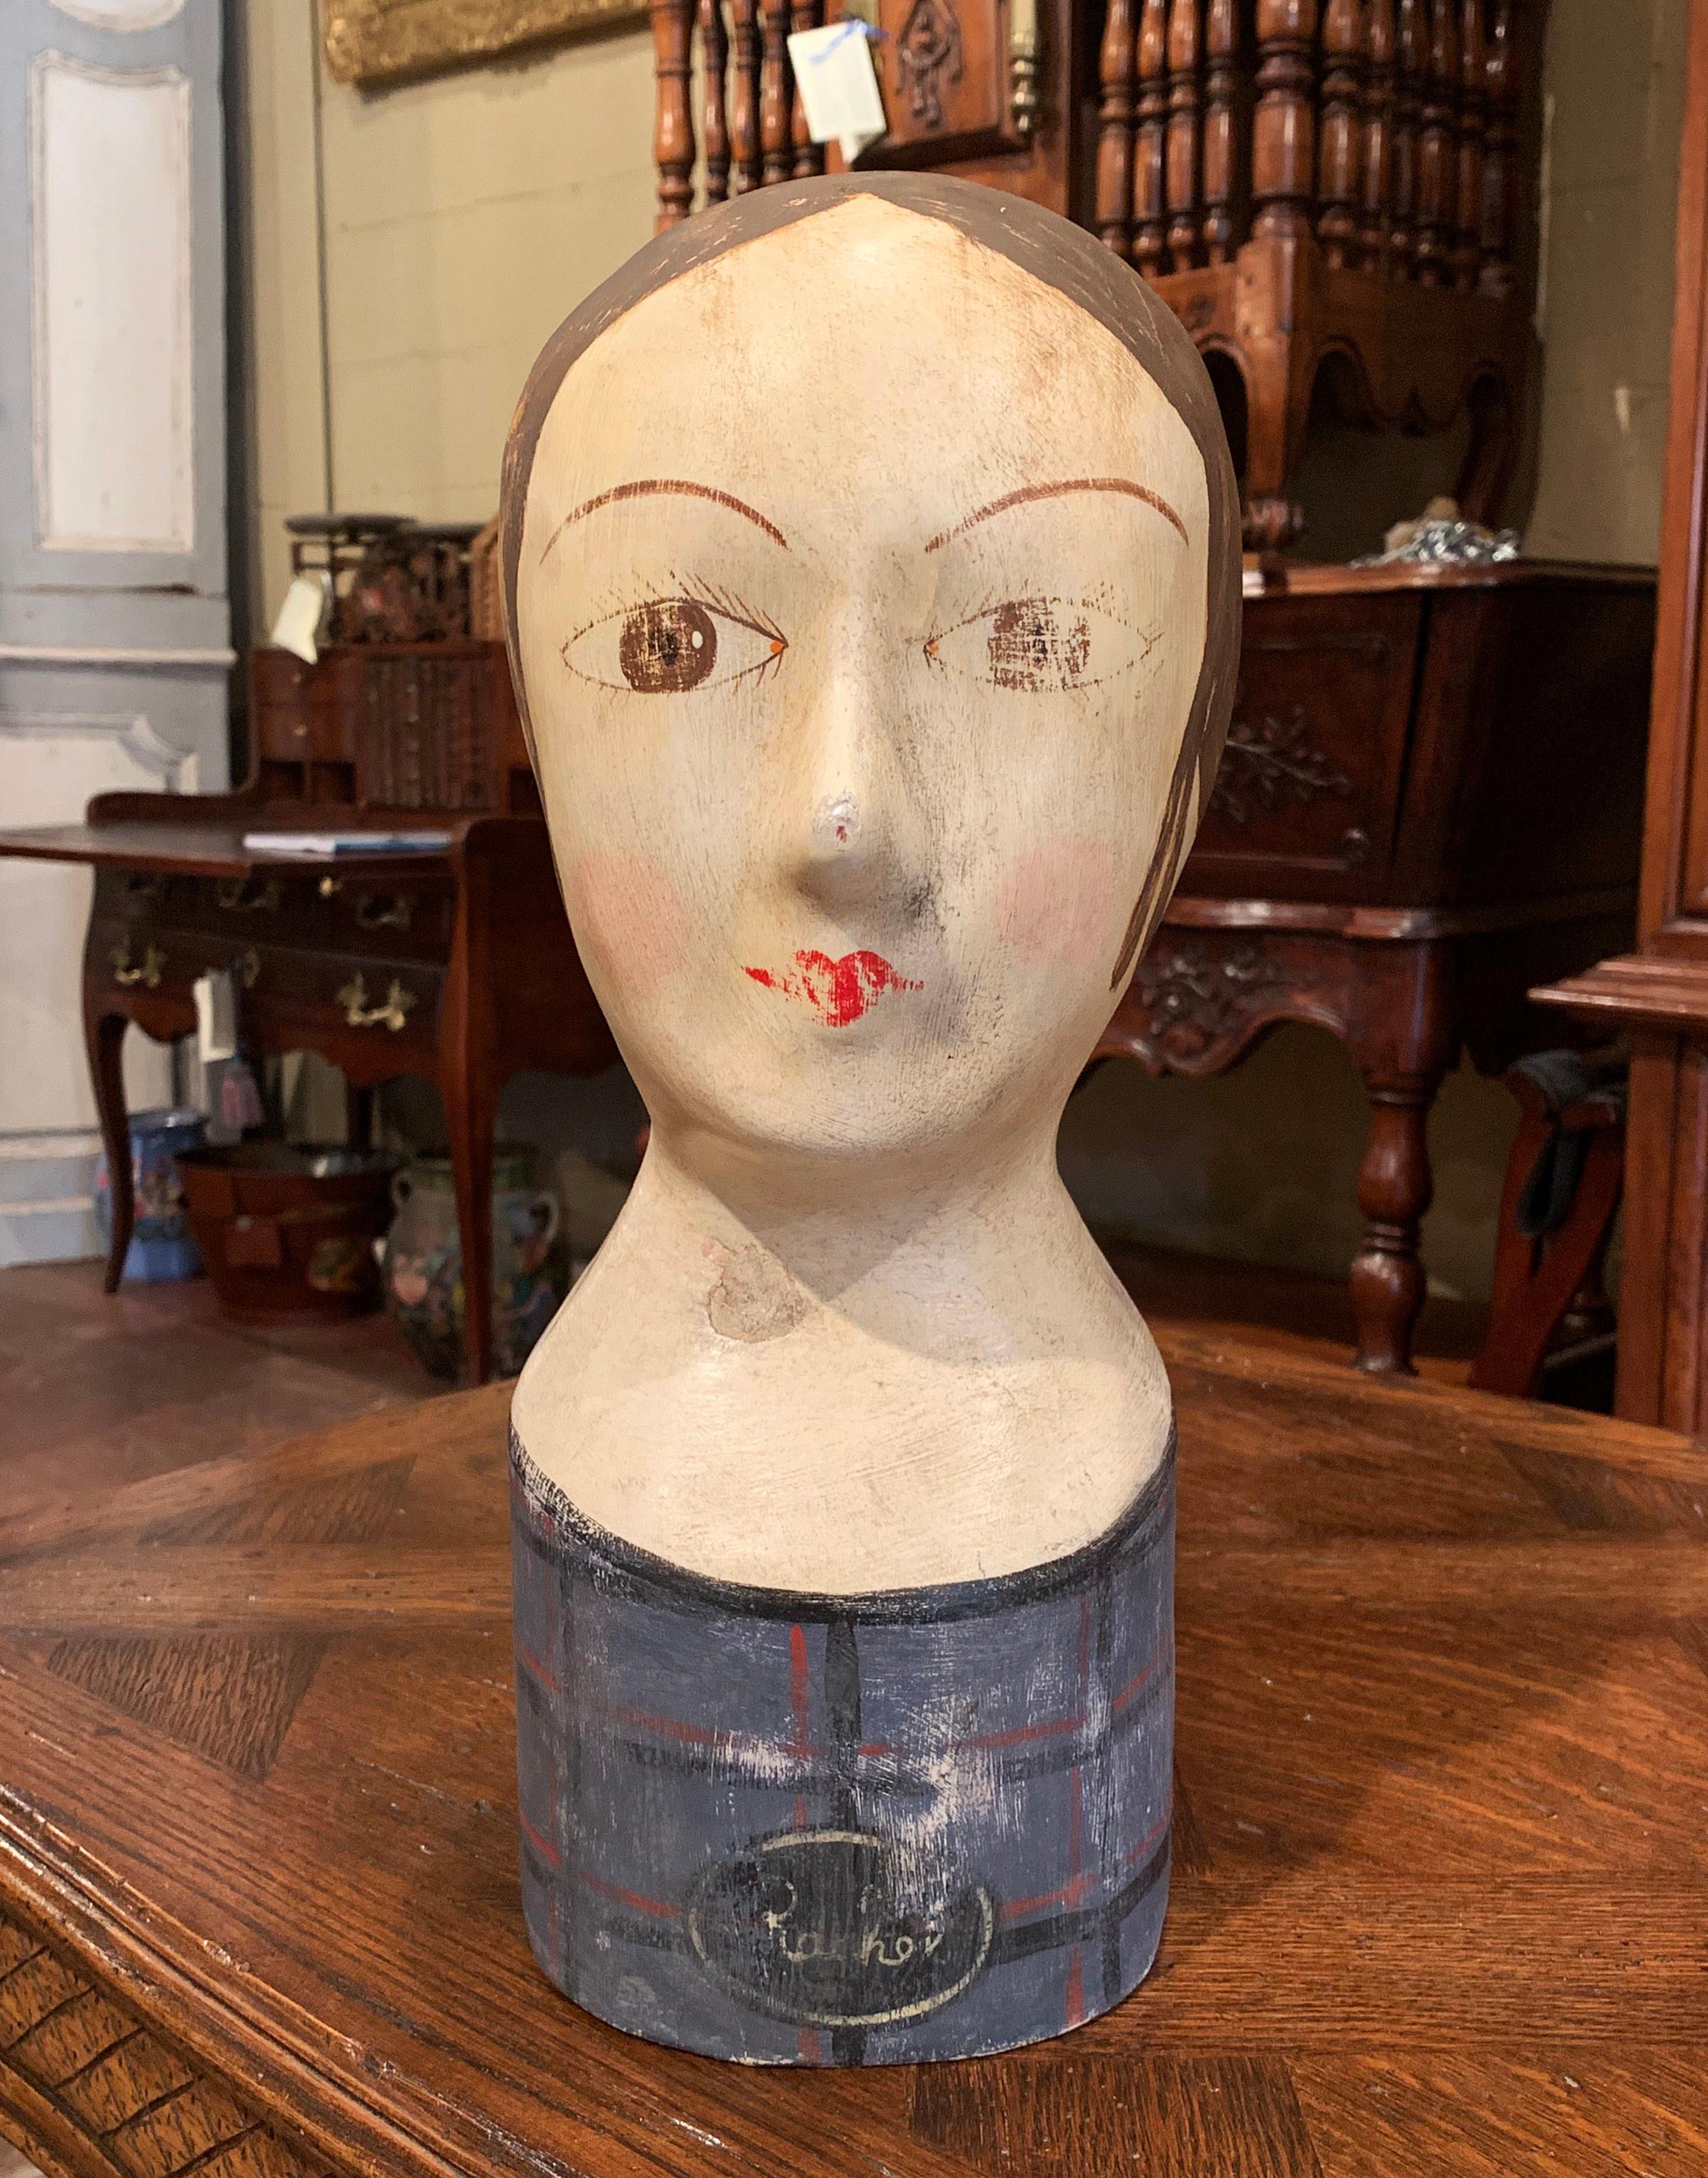 Add a conversation starter to your art collection with this hand painted, papier mâché bust. Created in France circa 1880, the head sculpture has theatrical, cartoon-like facial details. This type of bust is commonly called marotte in French, and is